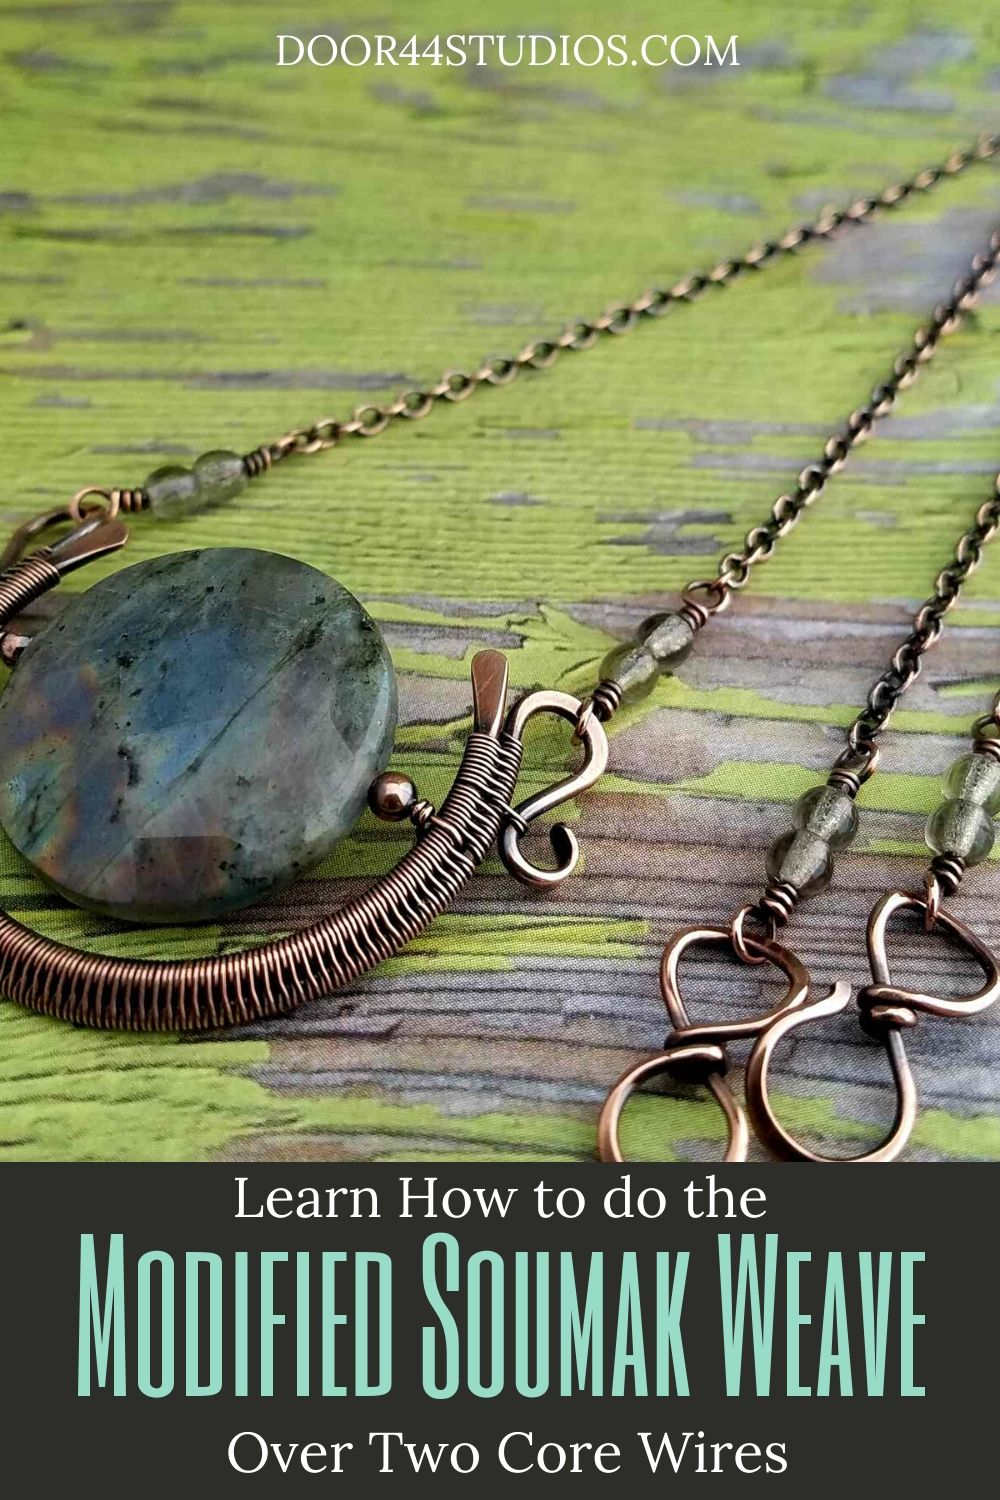 The Modified Soumak Weave is my favorite weave. I use it frequently in my jewelry tutorials. Learn the 2-core version of the Modified Soumak weave in this free tutorial, which is written for both left-handed and right-handed weavers. 